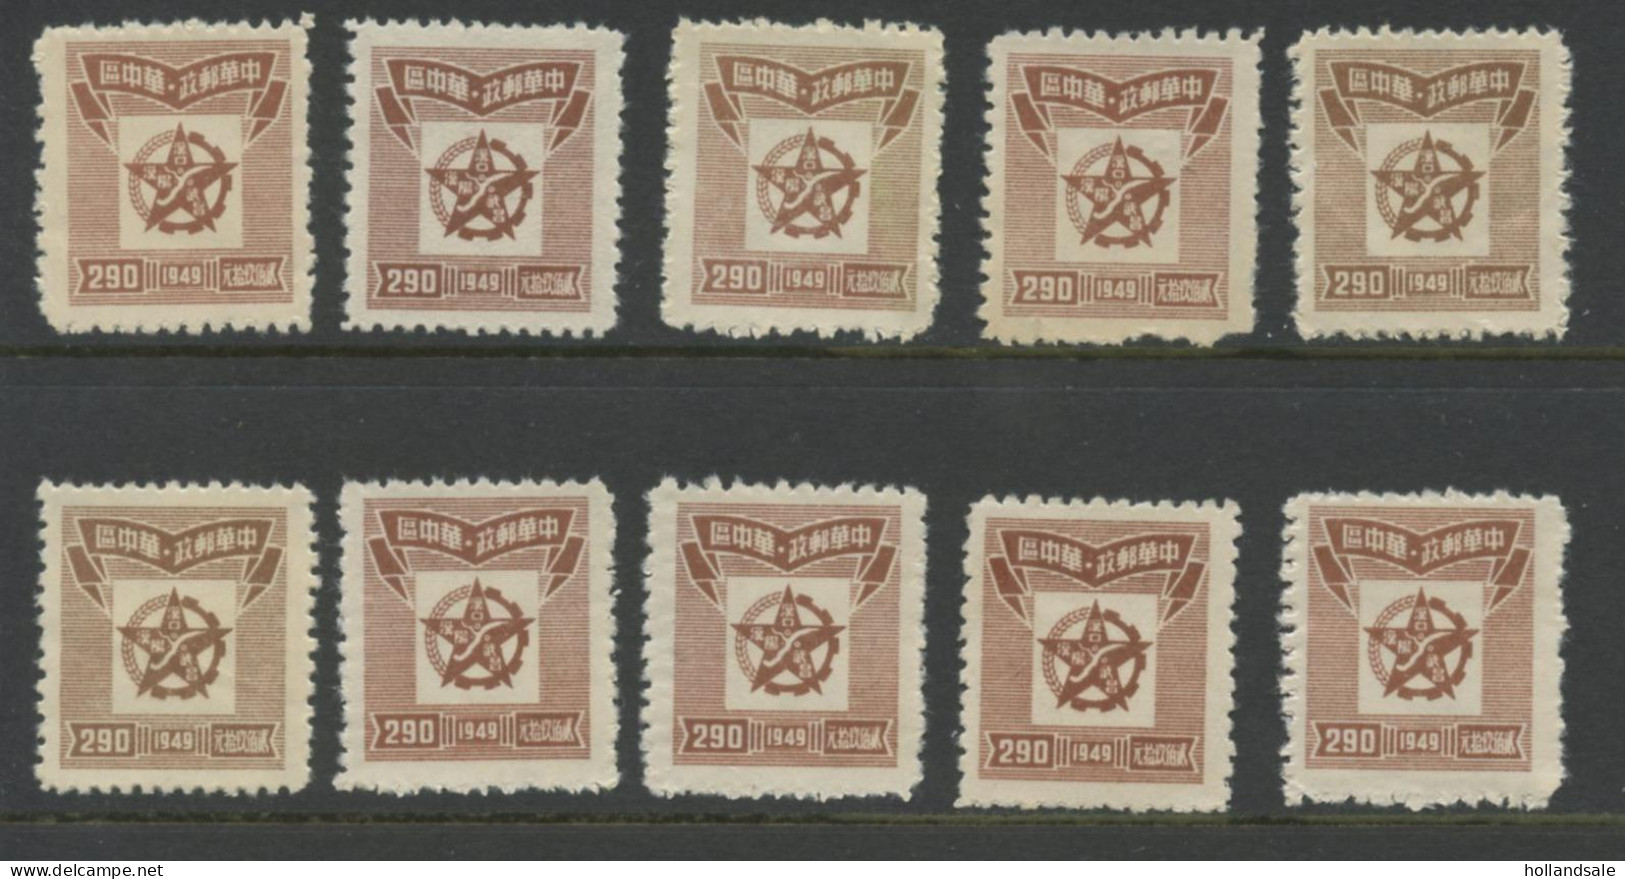 CHINA CENTRAL - 1949 MICHEL # 101. Ten (10) Unused Stamps. - Central China 1948-49